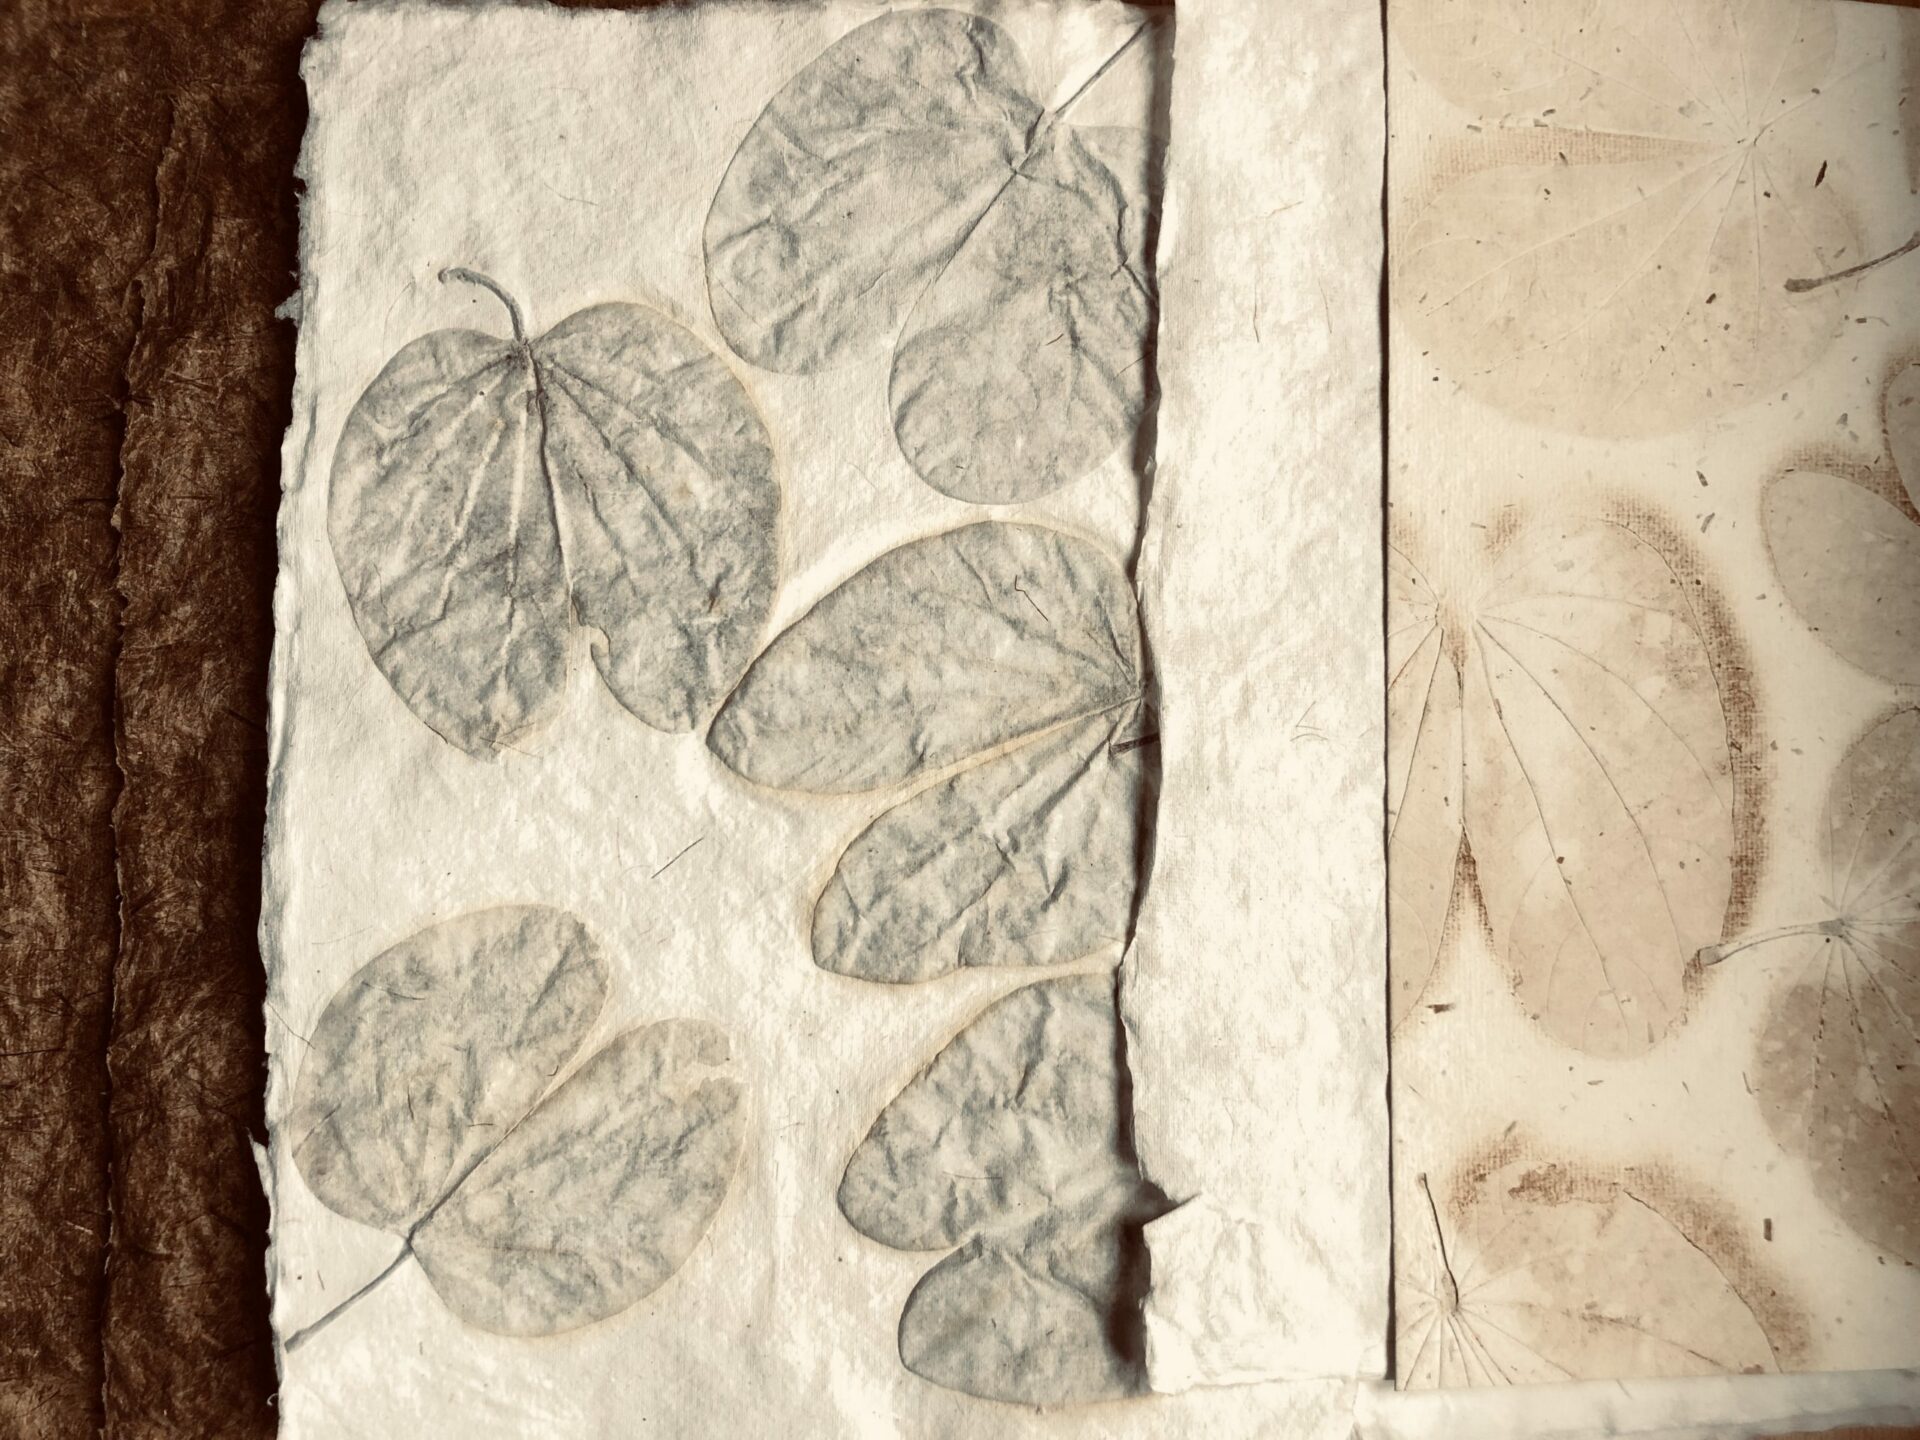 Worried about trees? You can take notes on stone paper made from